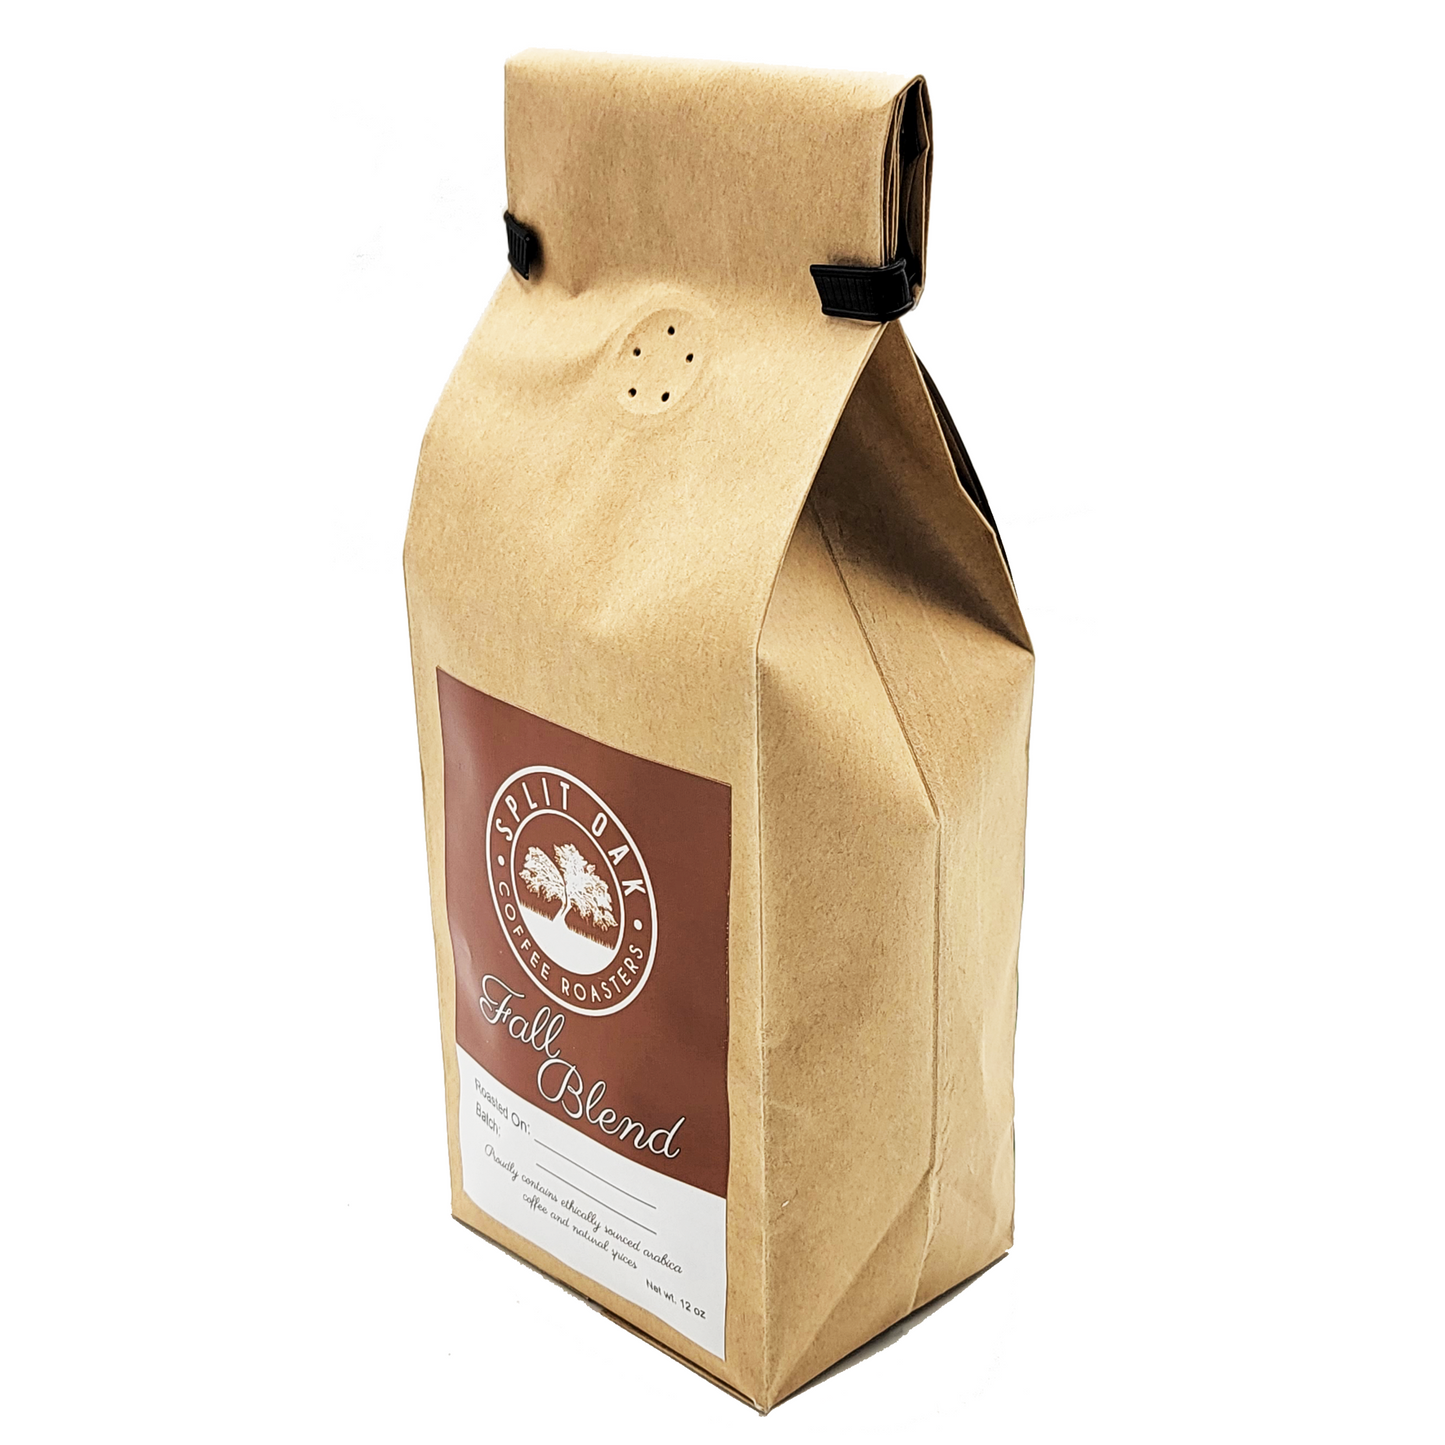 Special Coffee Fall Blend notes of chocolate, cherry and cream, hand roasted - L